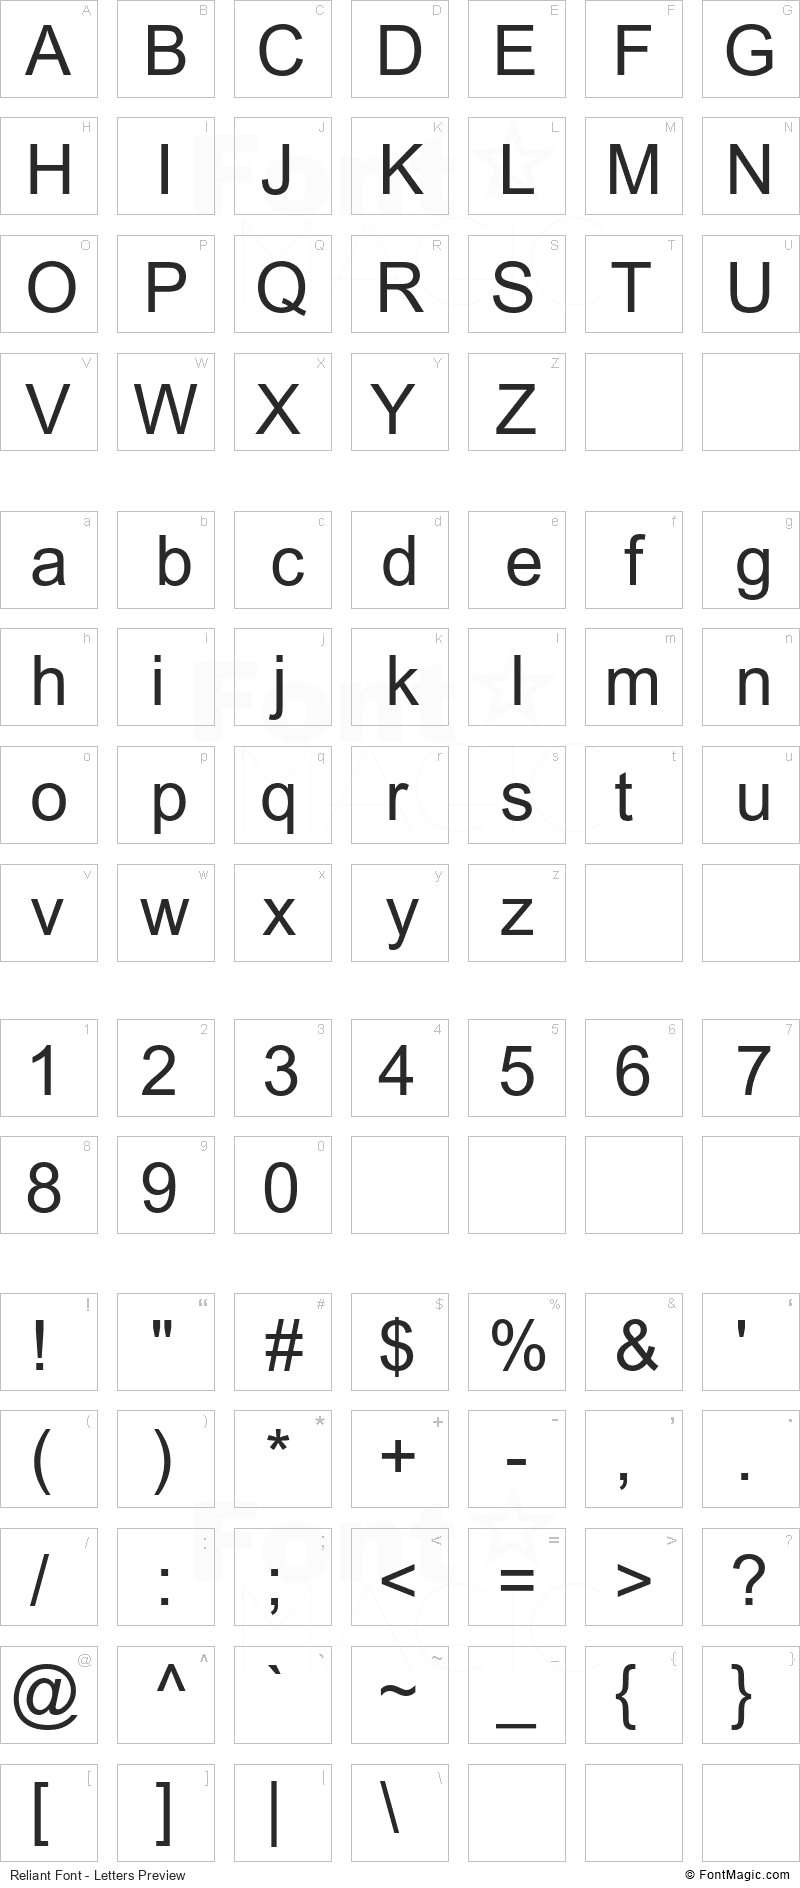 Reliant Font - All Latters Preview Chart